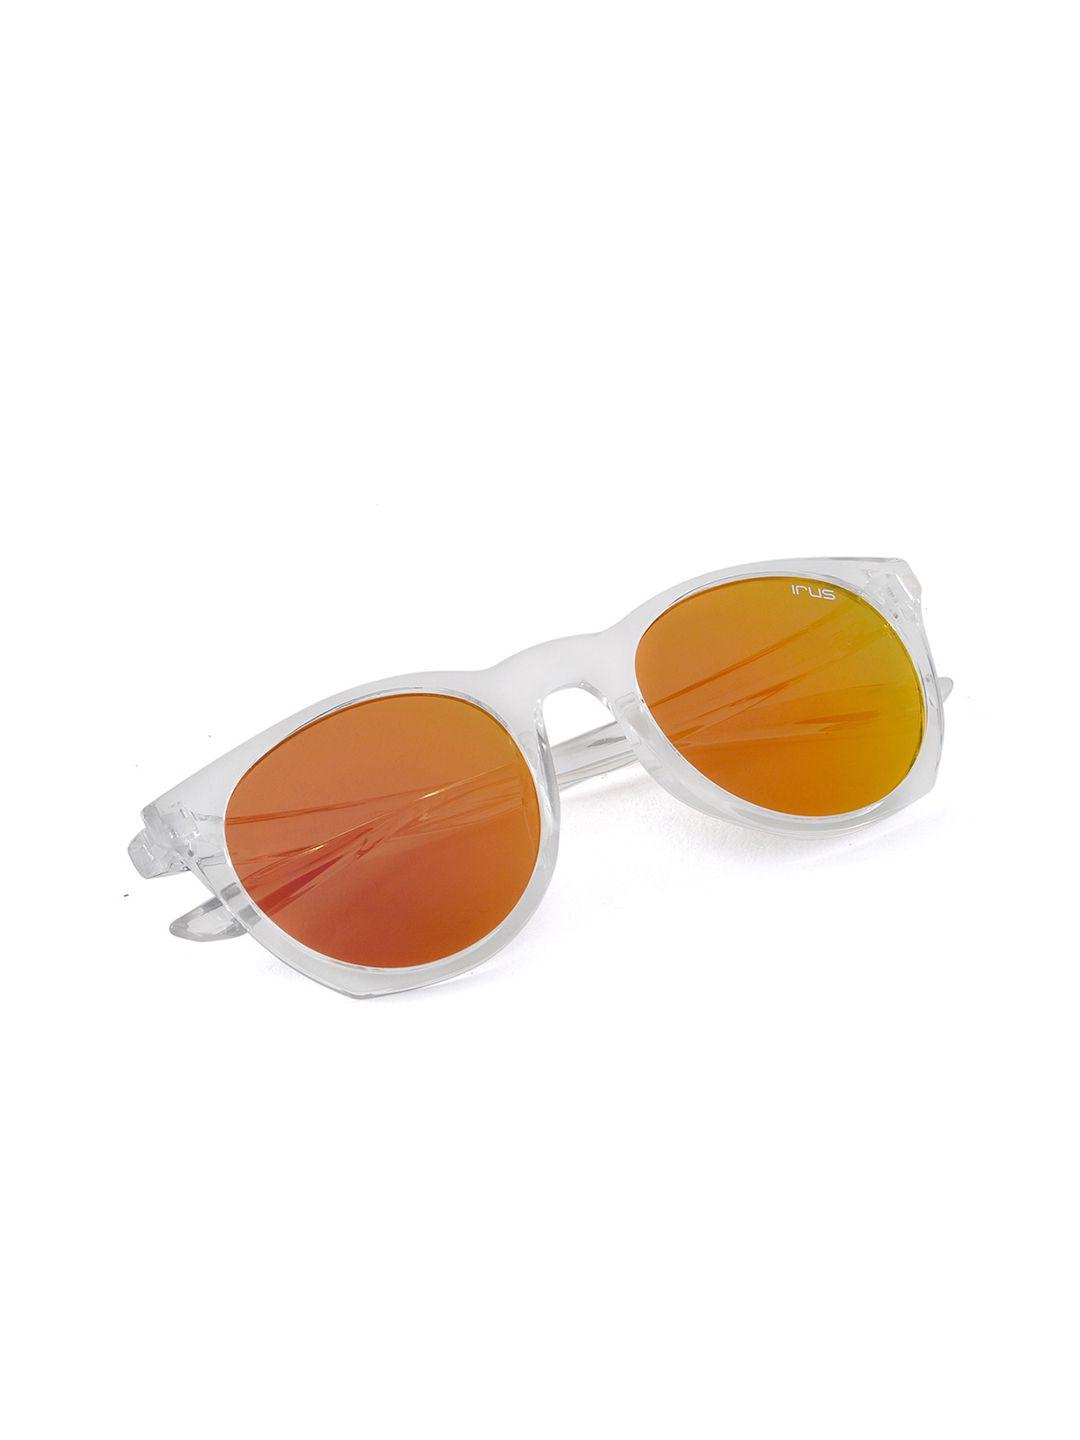 irus by idee unisex orange lens & silver-toned oval sunglasses with uv protected lens